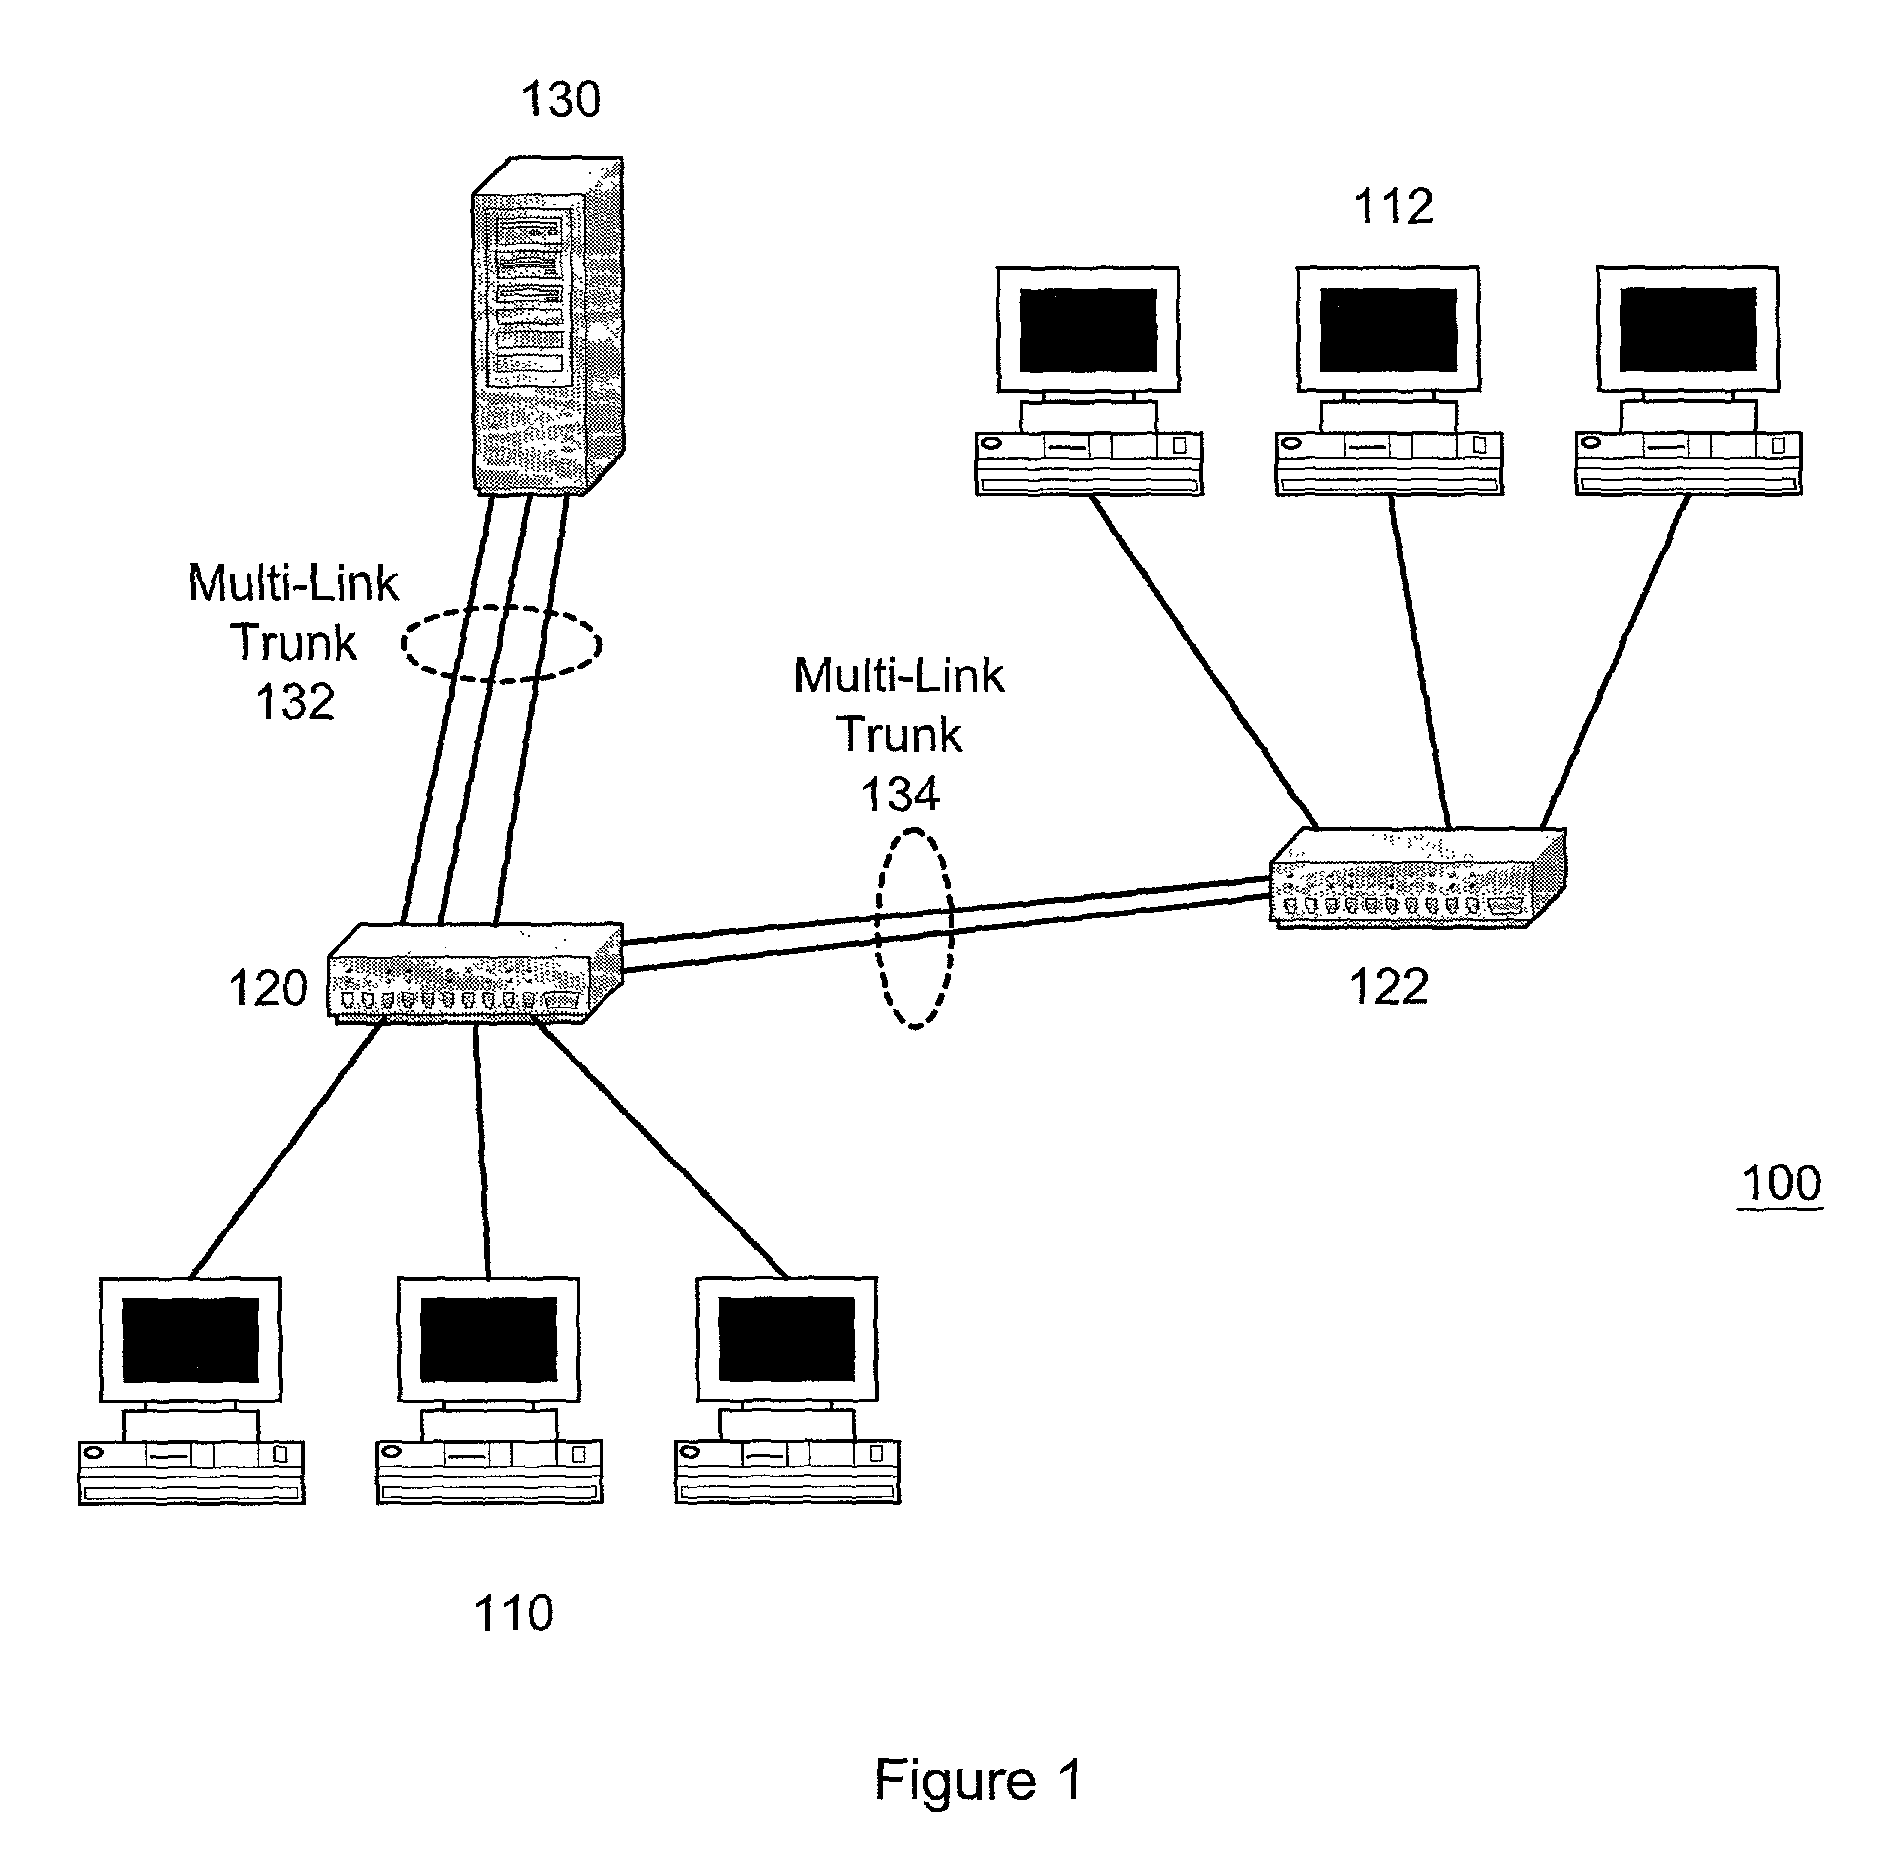 Technique for adaptively load balancing connections in multi-link trunks